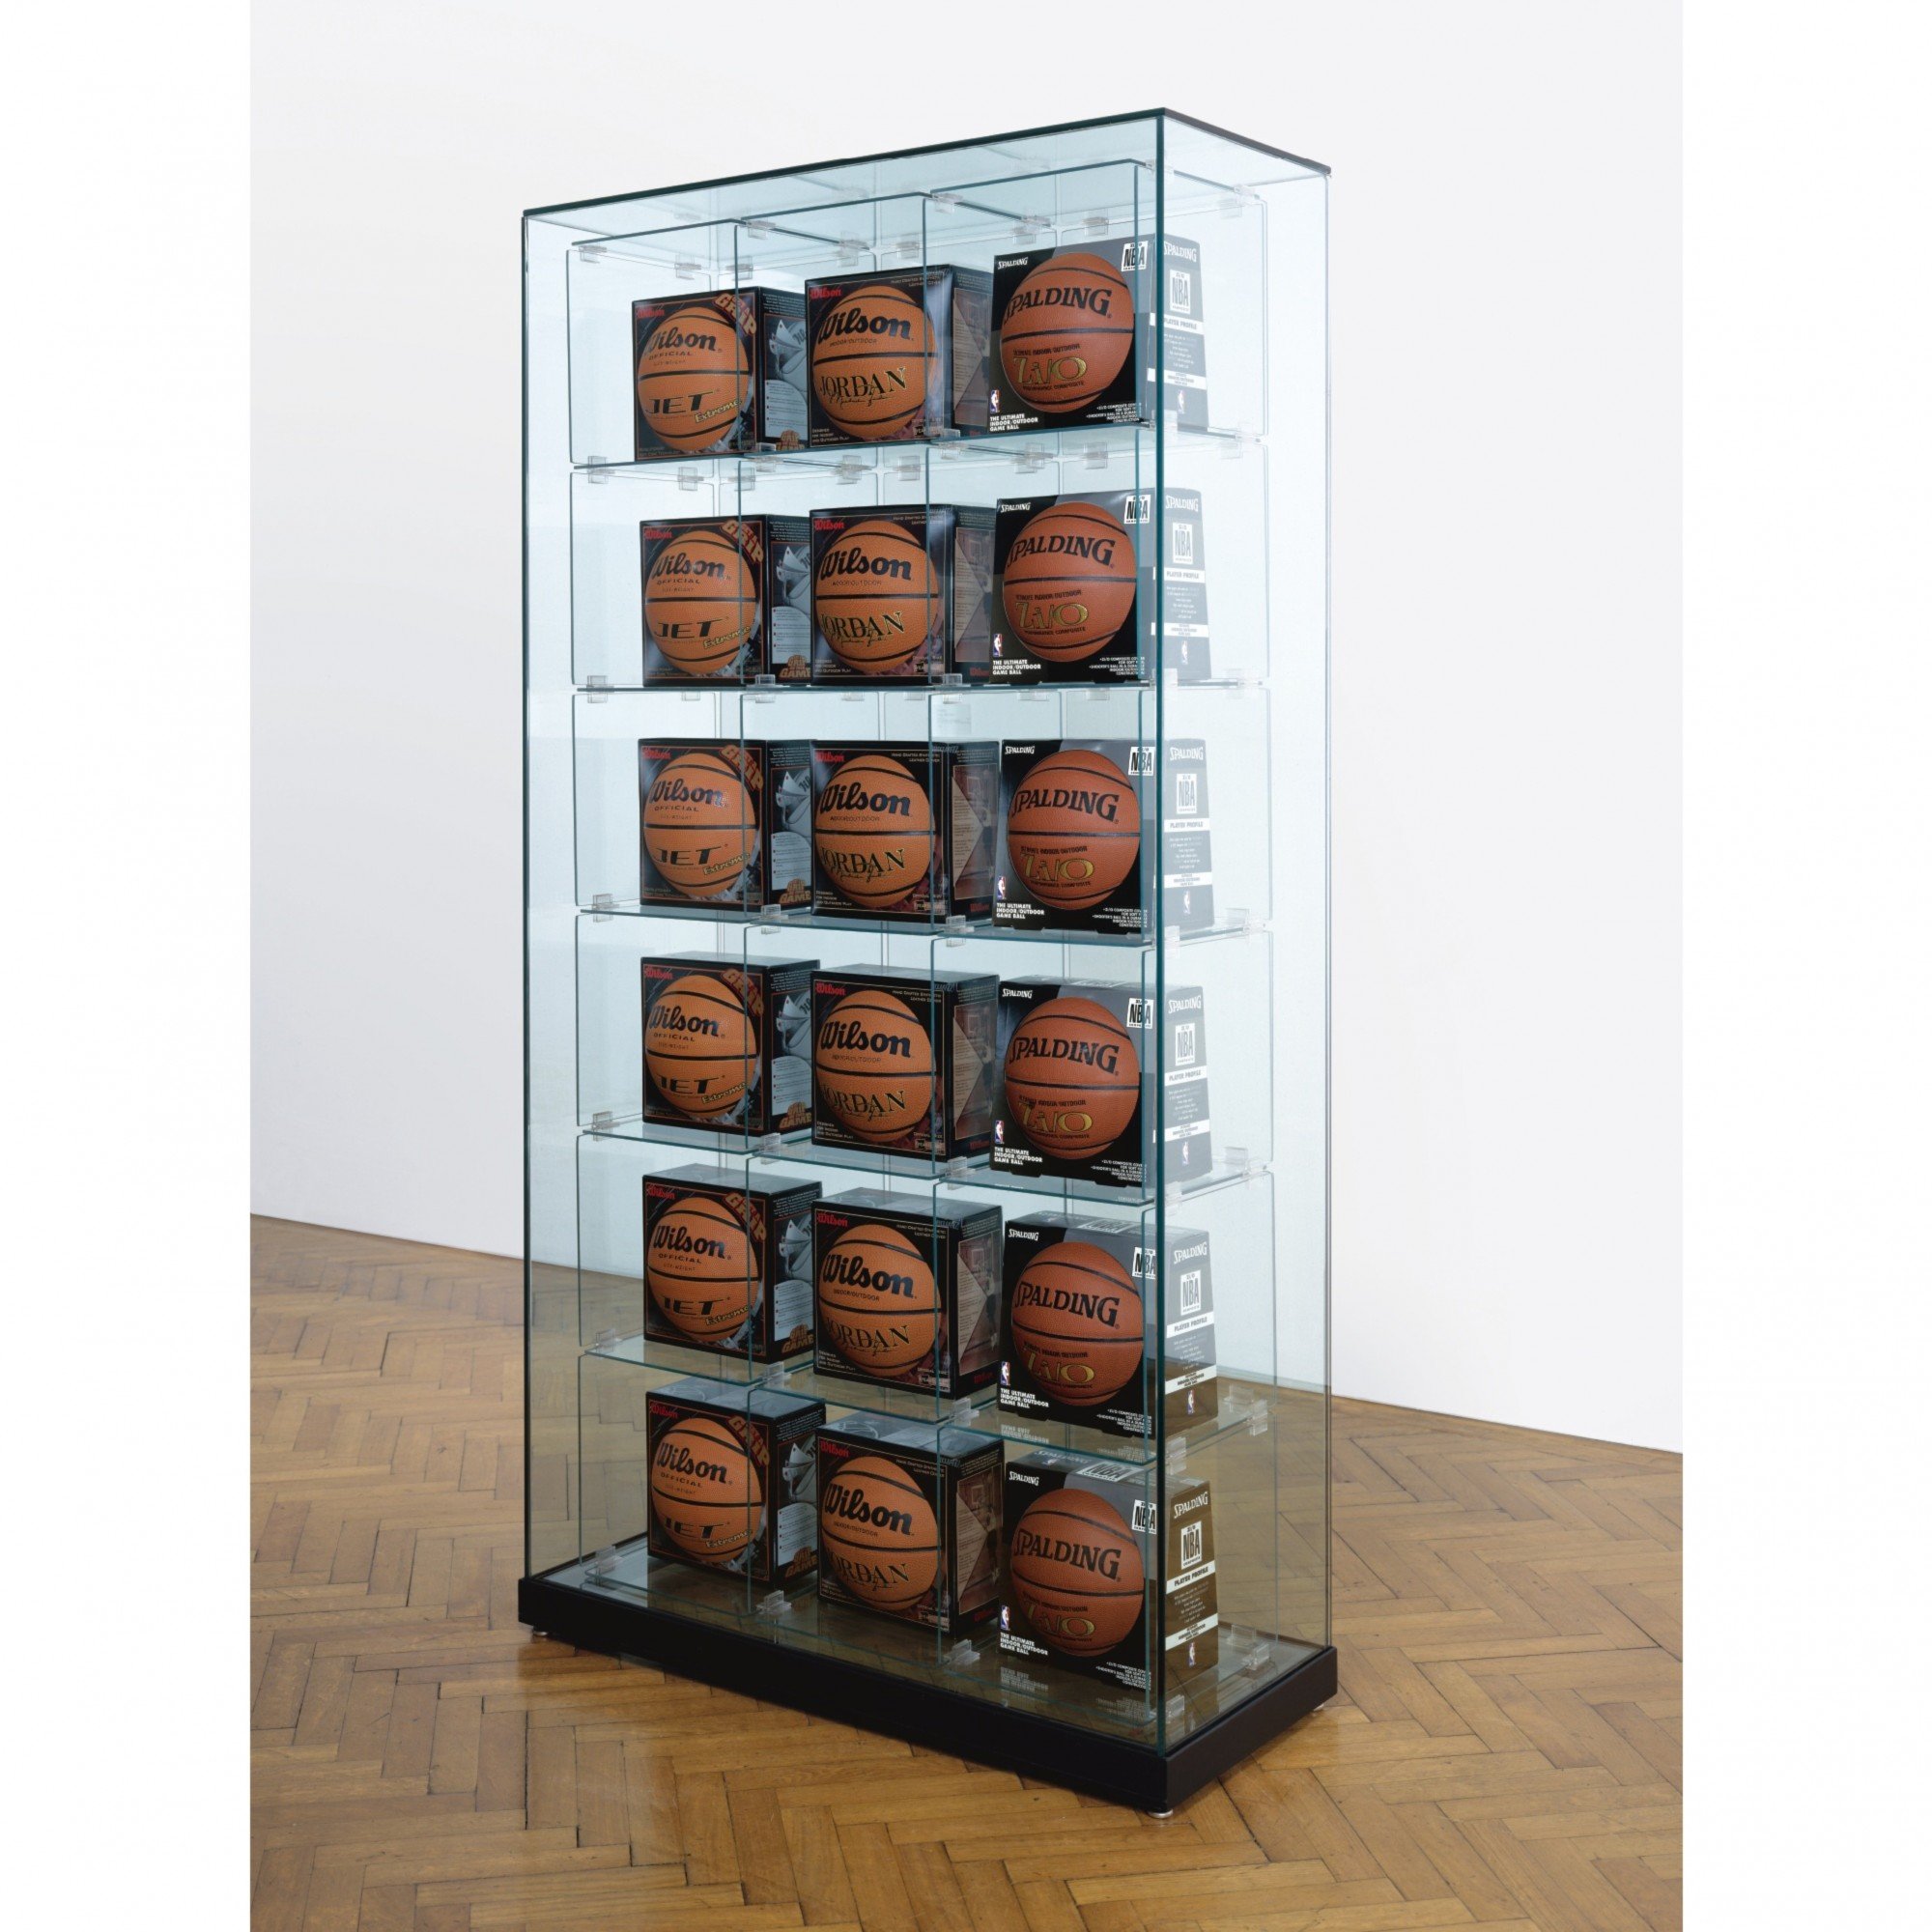 Encased - Three Rows by Jeff Koons (1983-1993/98). Image: private collection